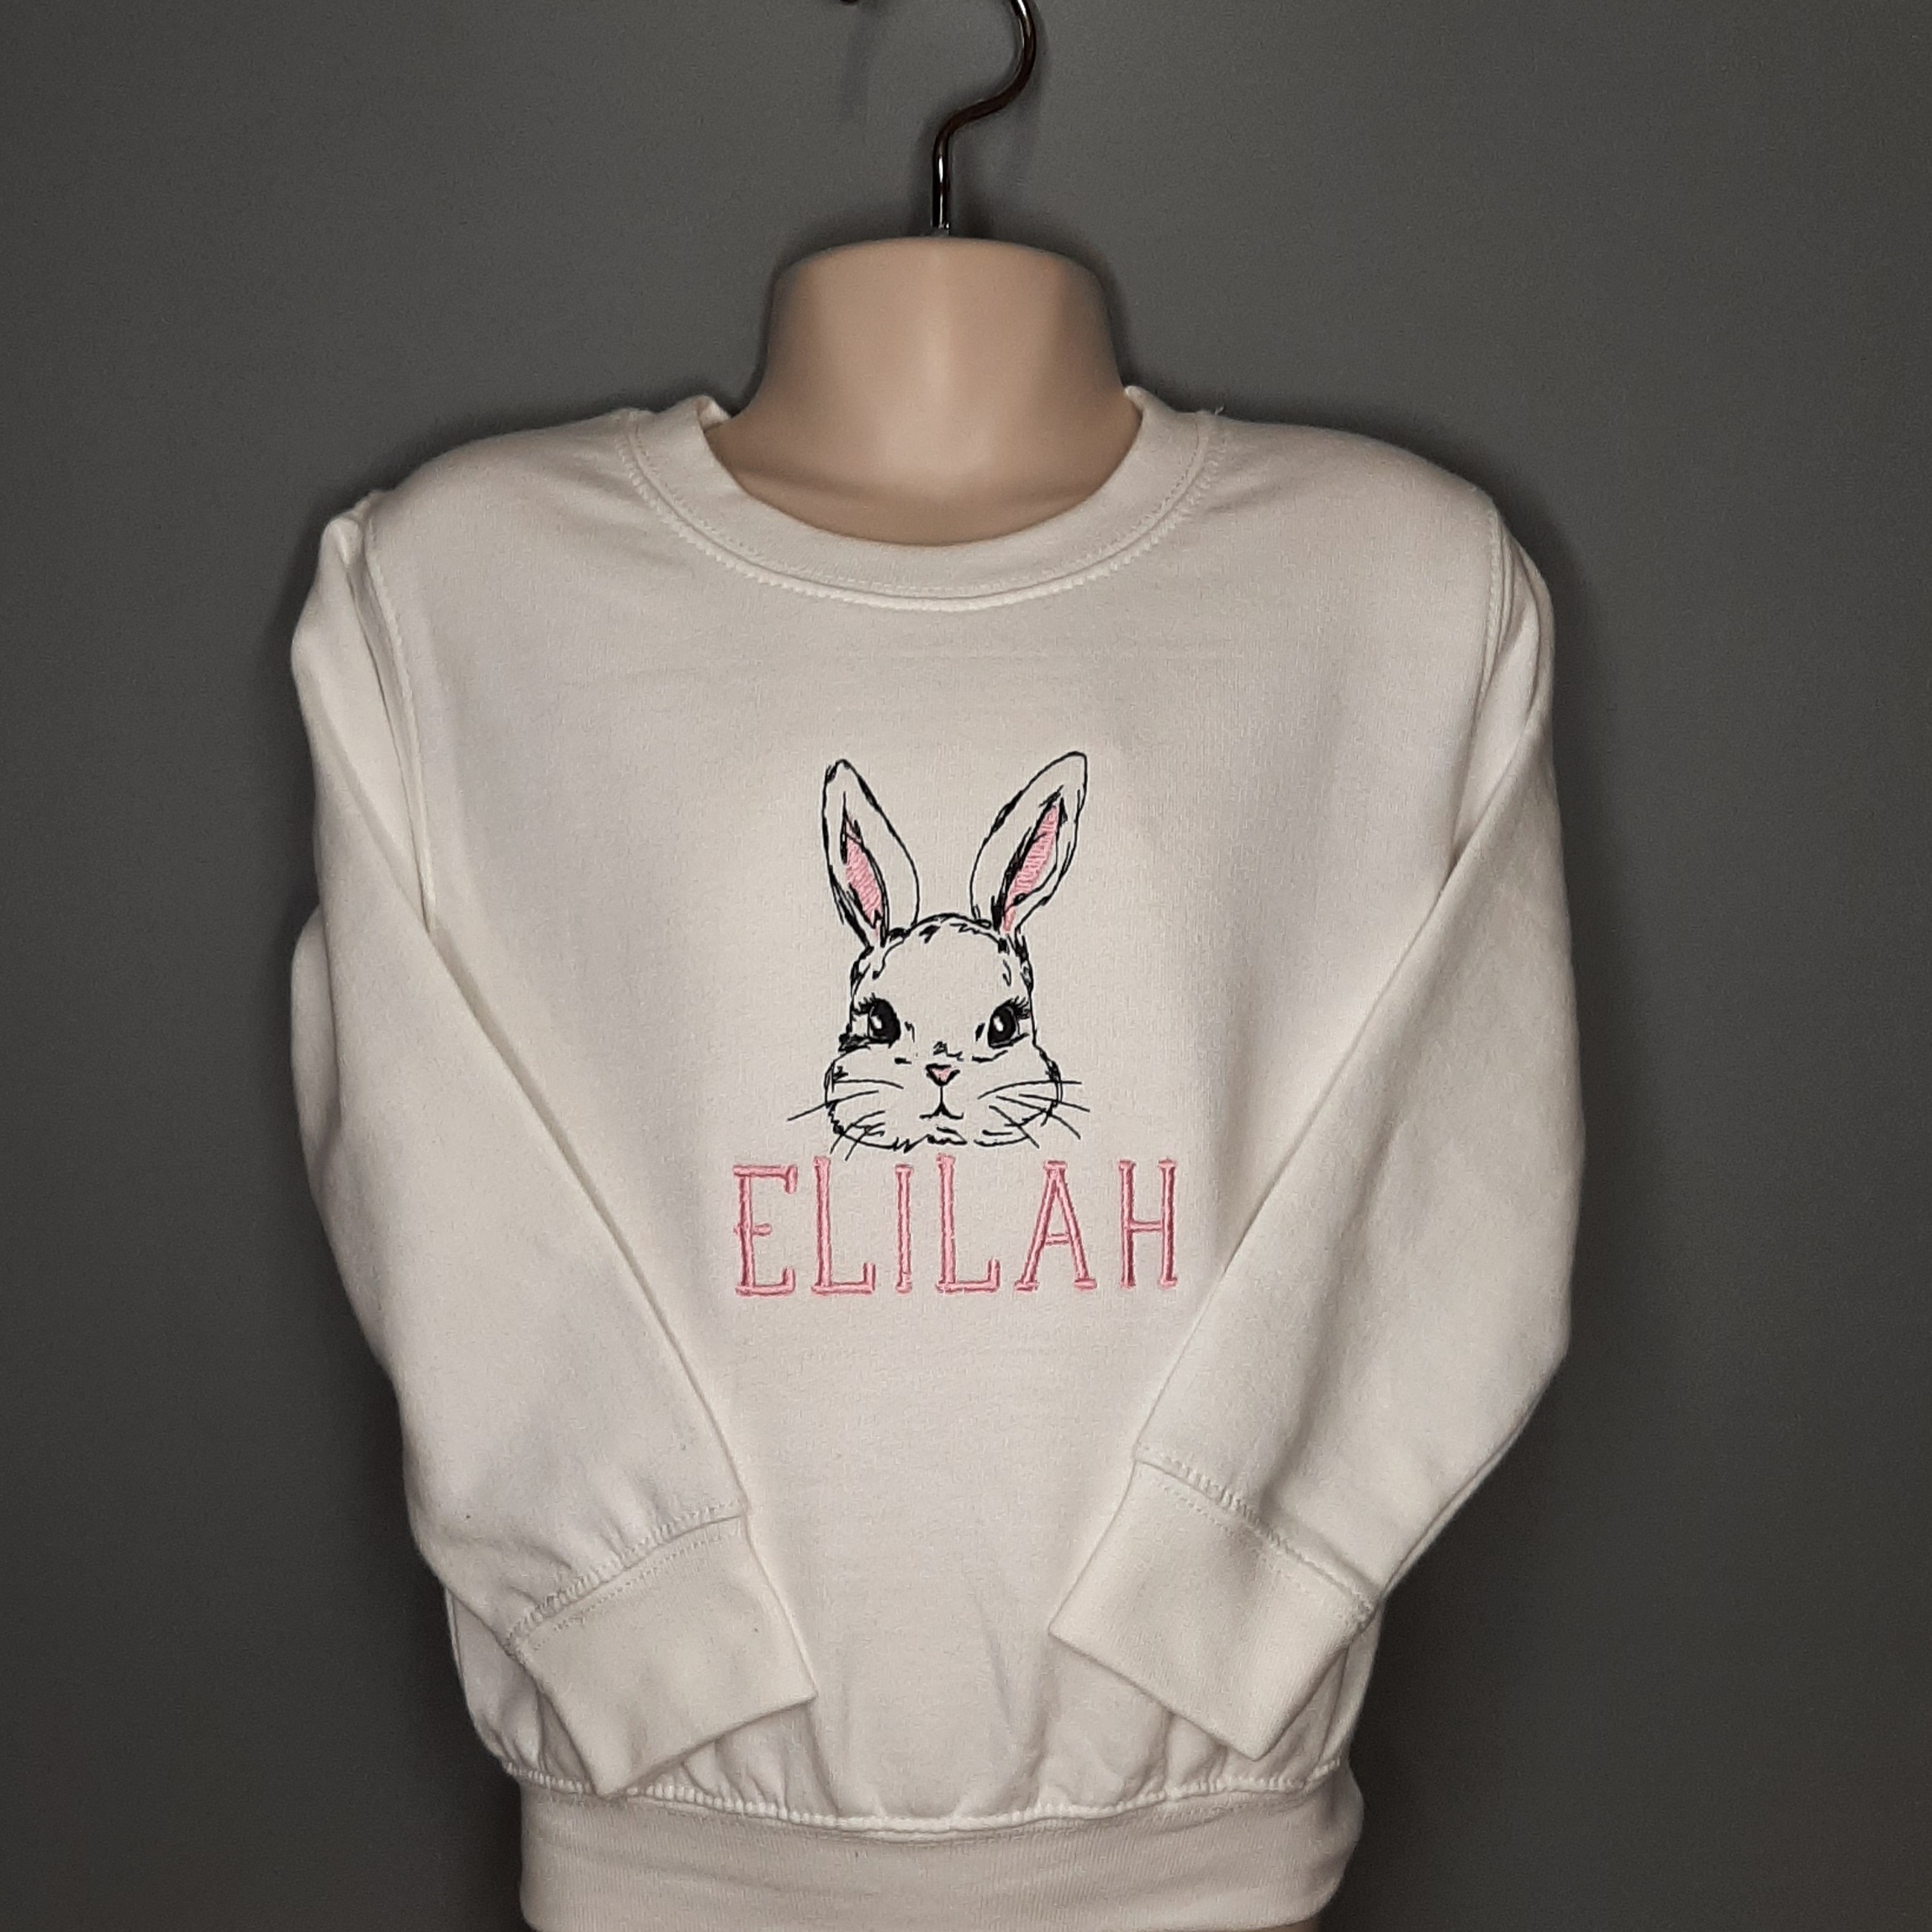 Bunny Rabbit T-shirt/Jumper, large sketched bunny with pink ears and names embroidered, great easter gift